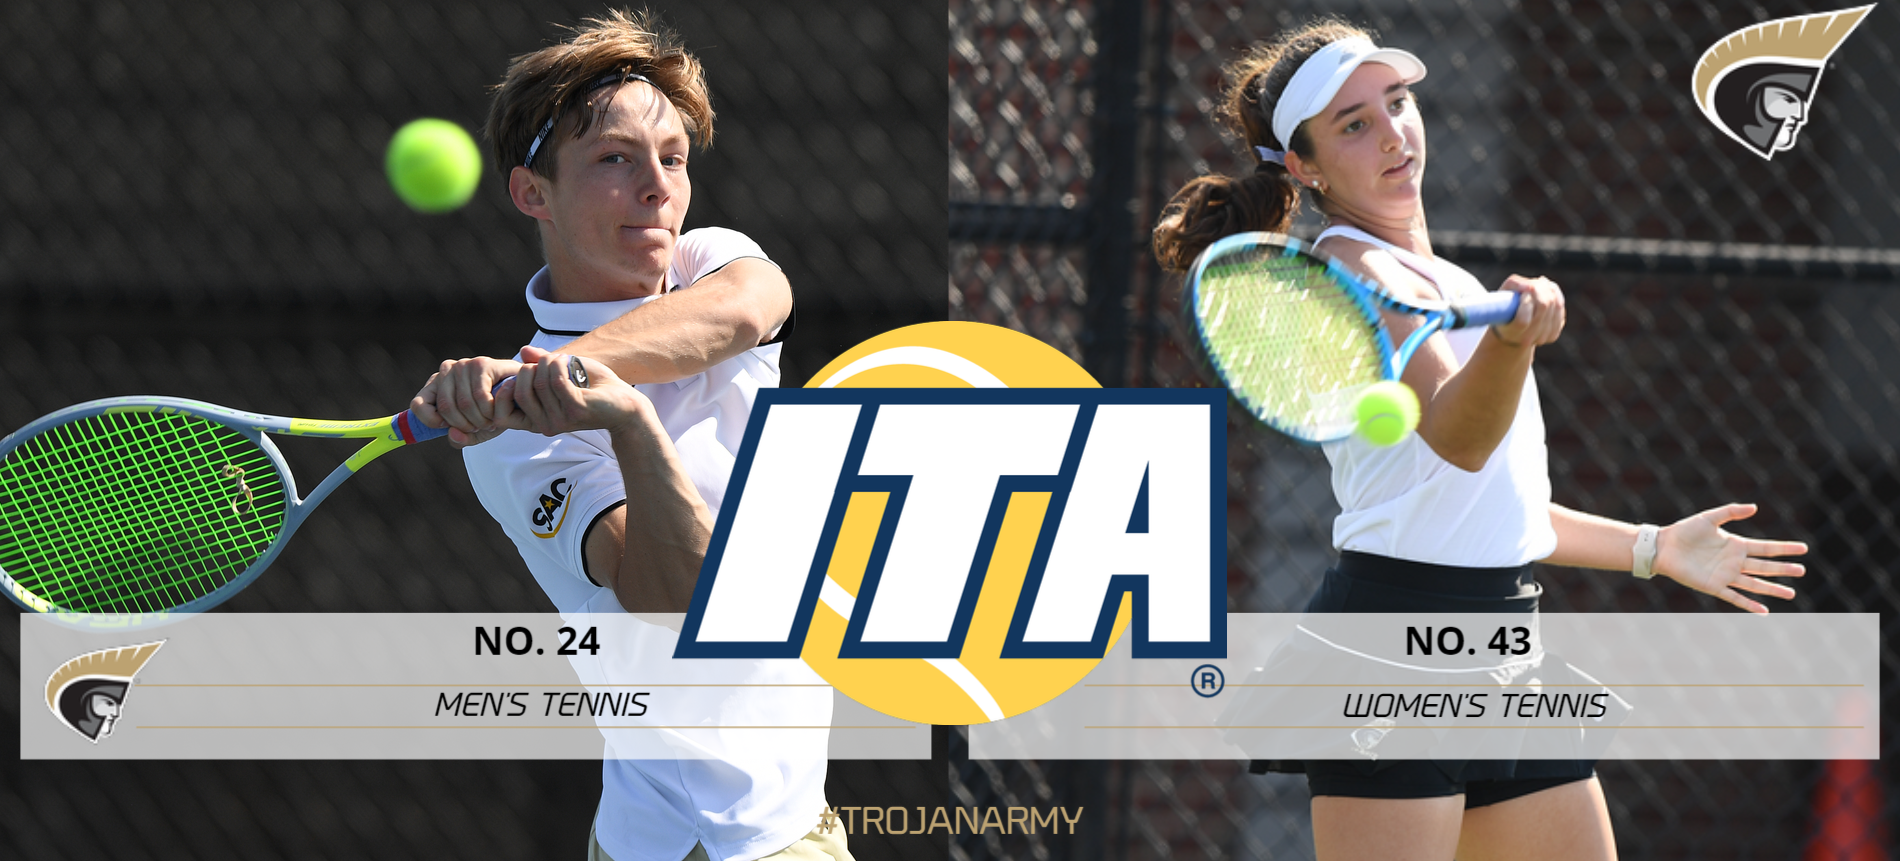 Men’s and Women’s Tennis Ranked In Latest ITA Rankings